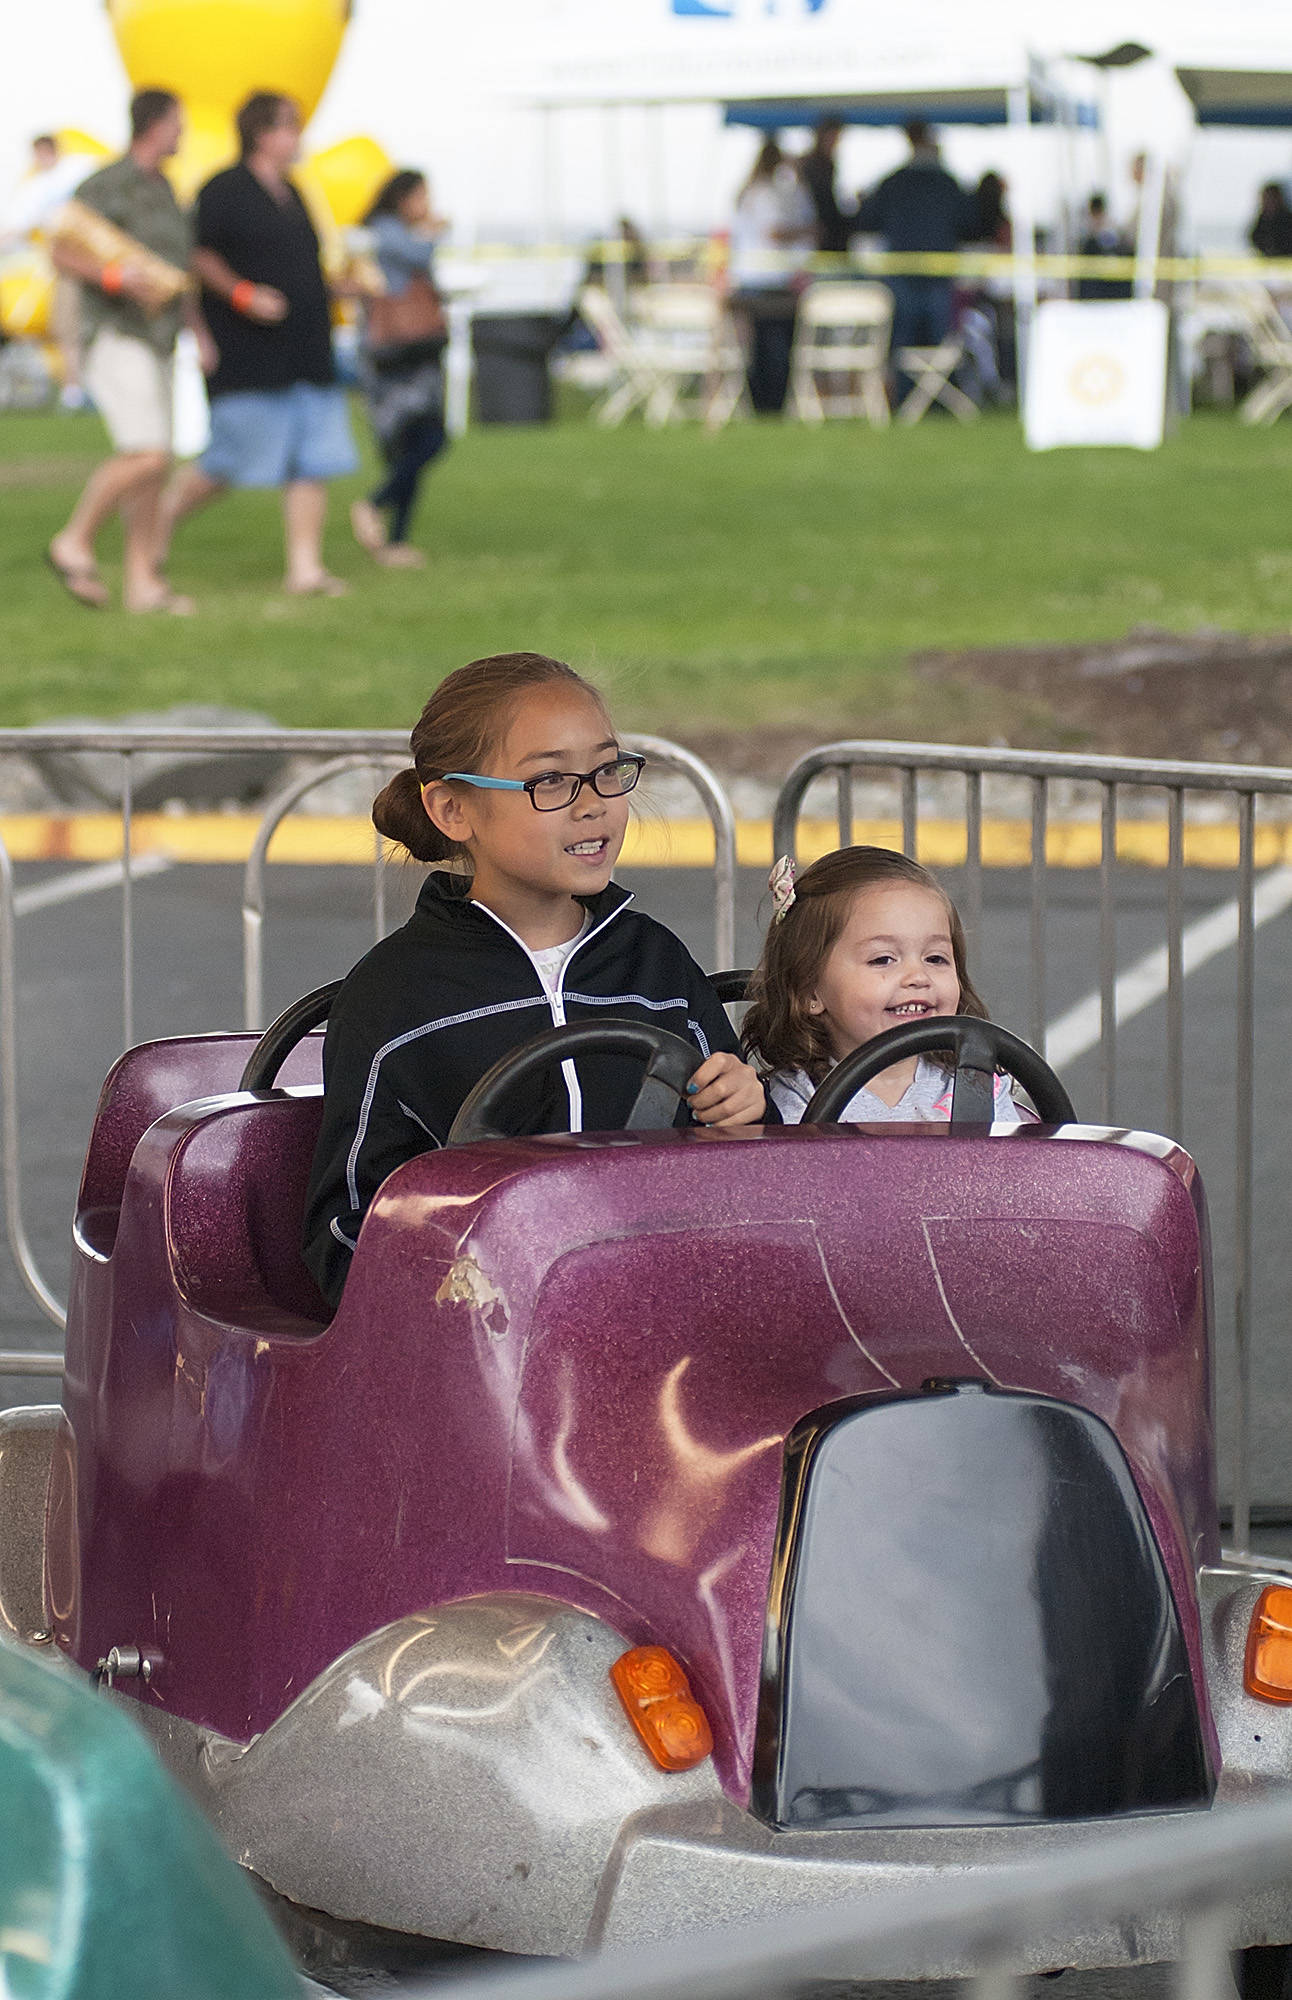 Children can enjoy the carnival rides at Whaling Days this weekend in Silverdale.